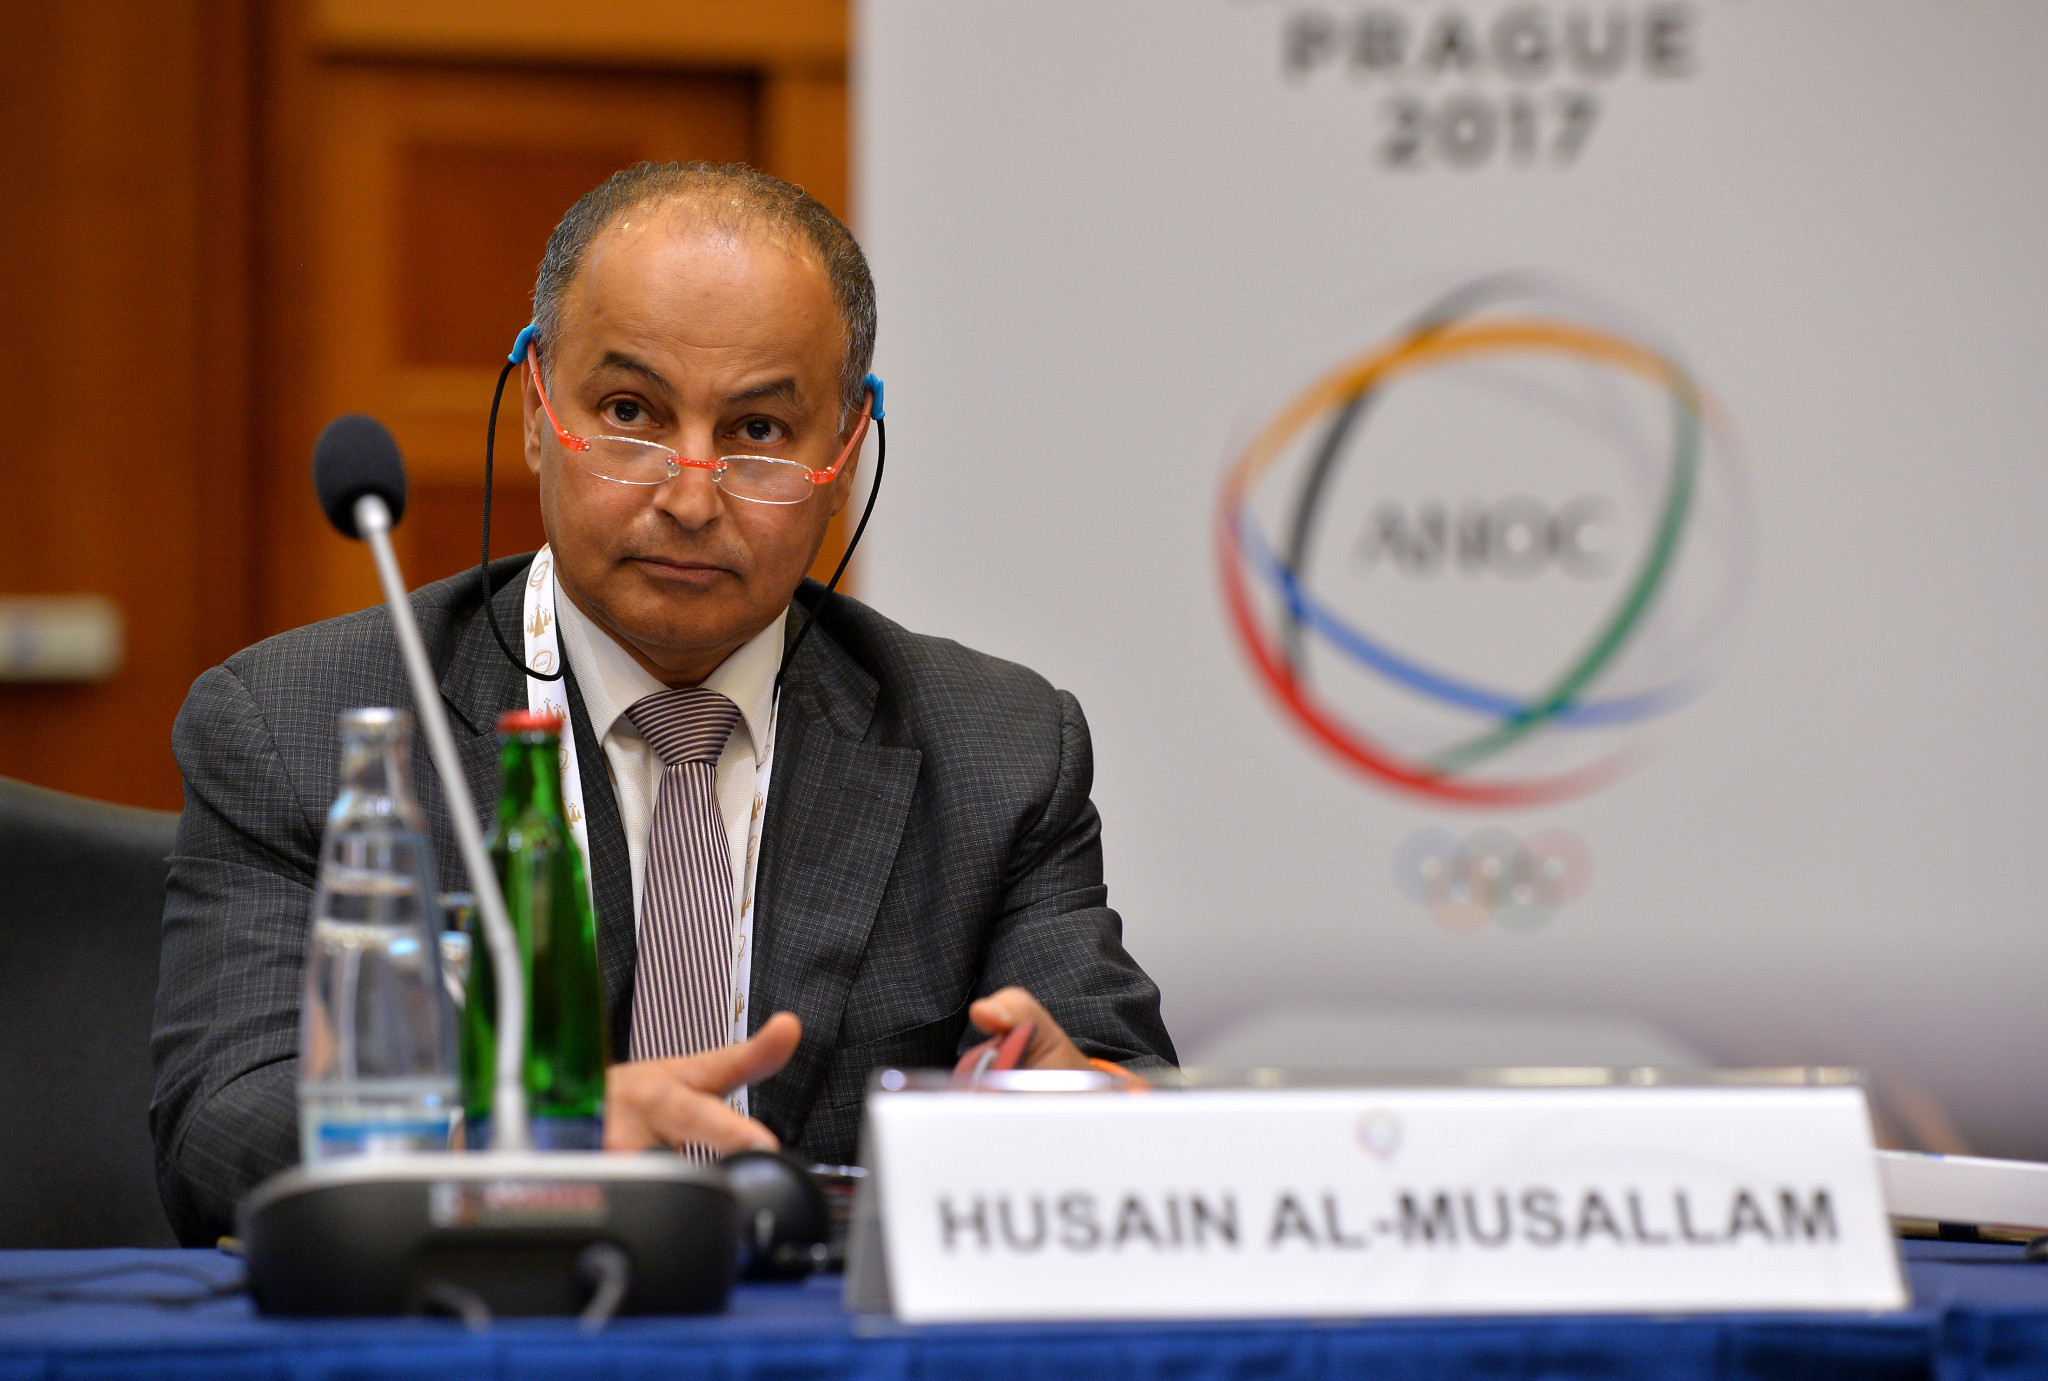 Husain Al-Musallam is set to replace Julio Maglione as head of the International Swimming Federation ©Getty Images